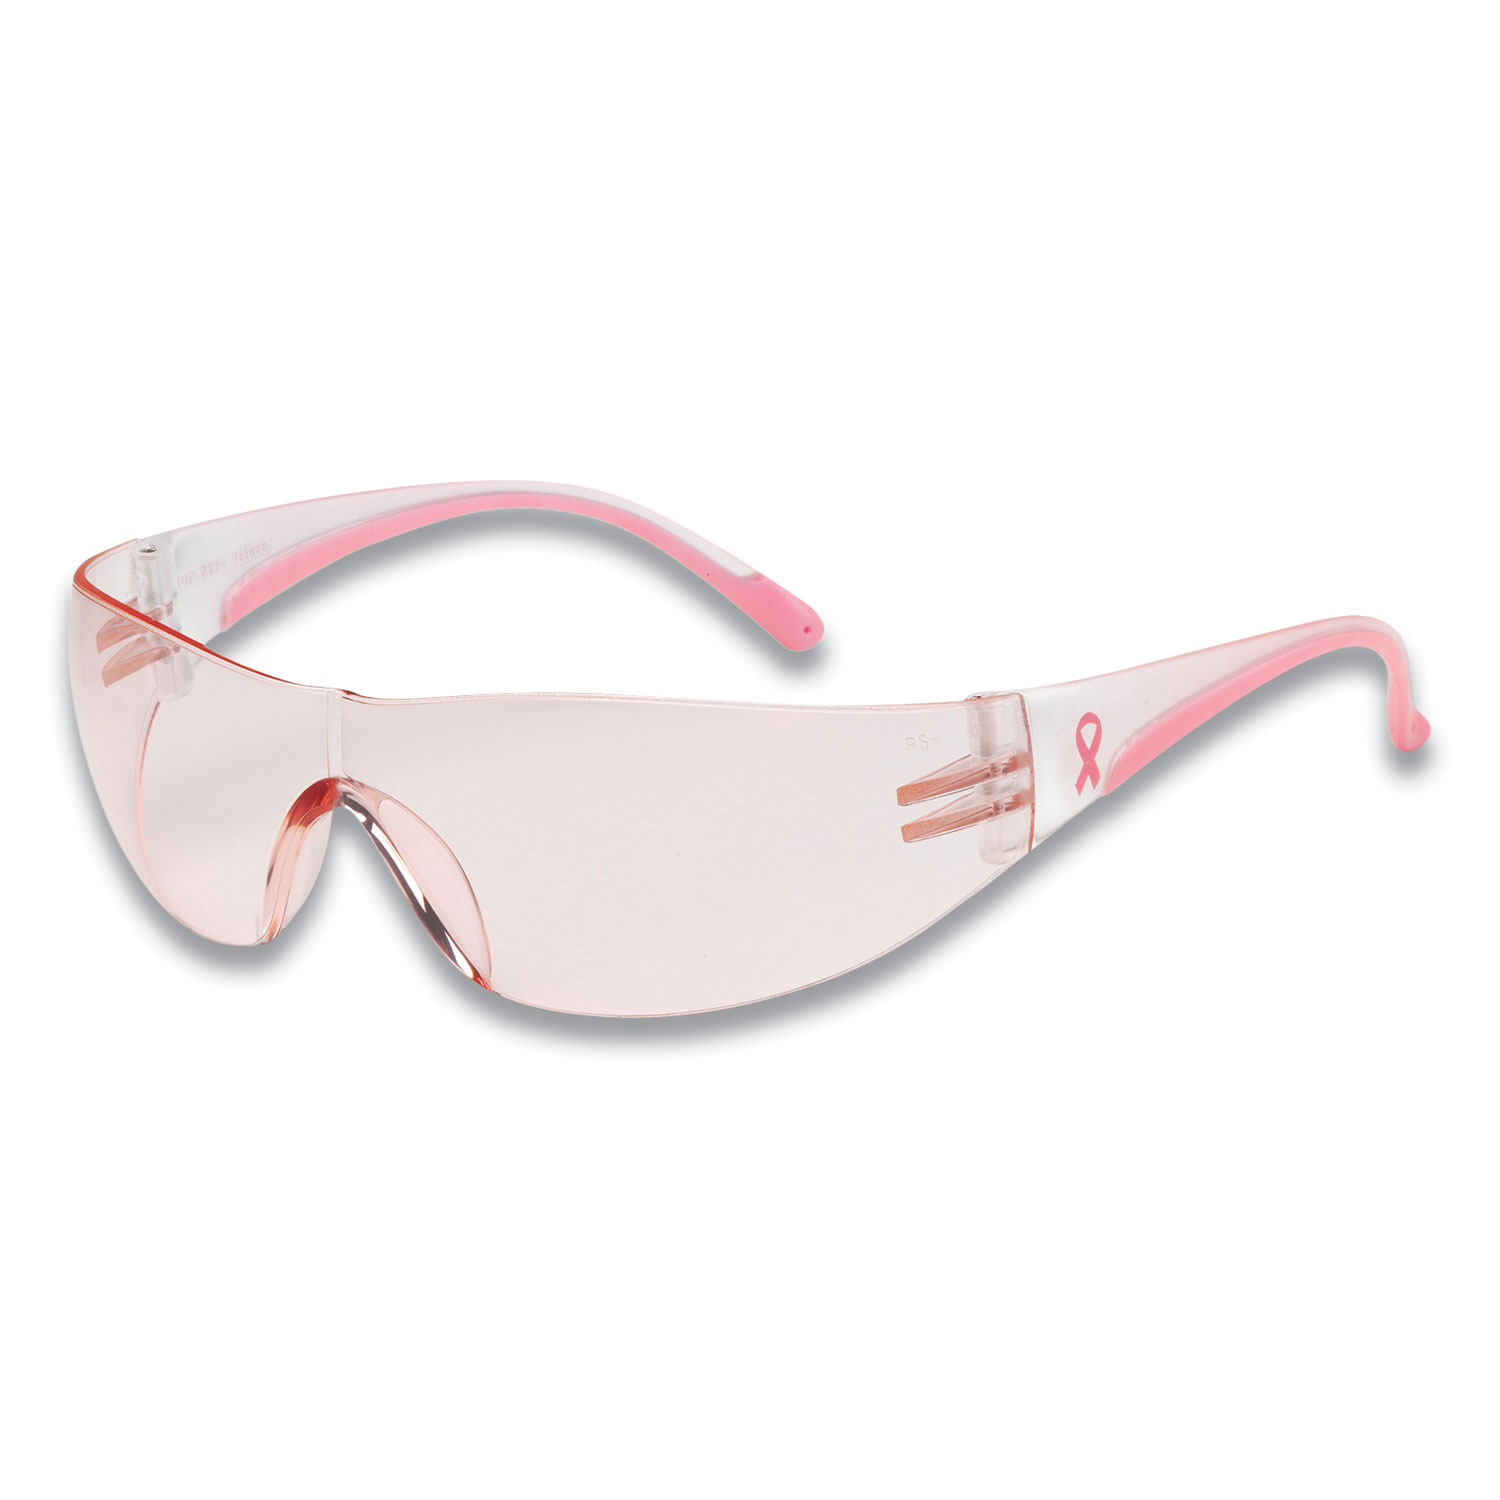 Bouton® Eva Optical Safety Glasses, Anti-Scratch, Pink Lens, Pink/Clear Frame